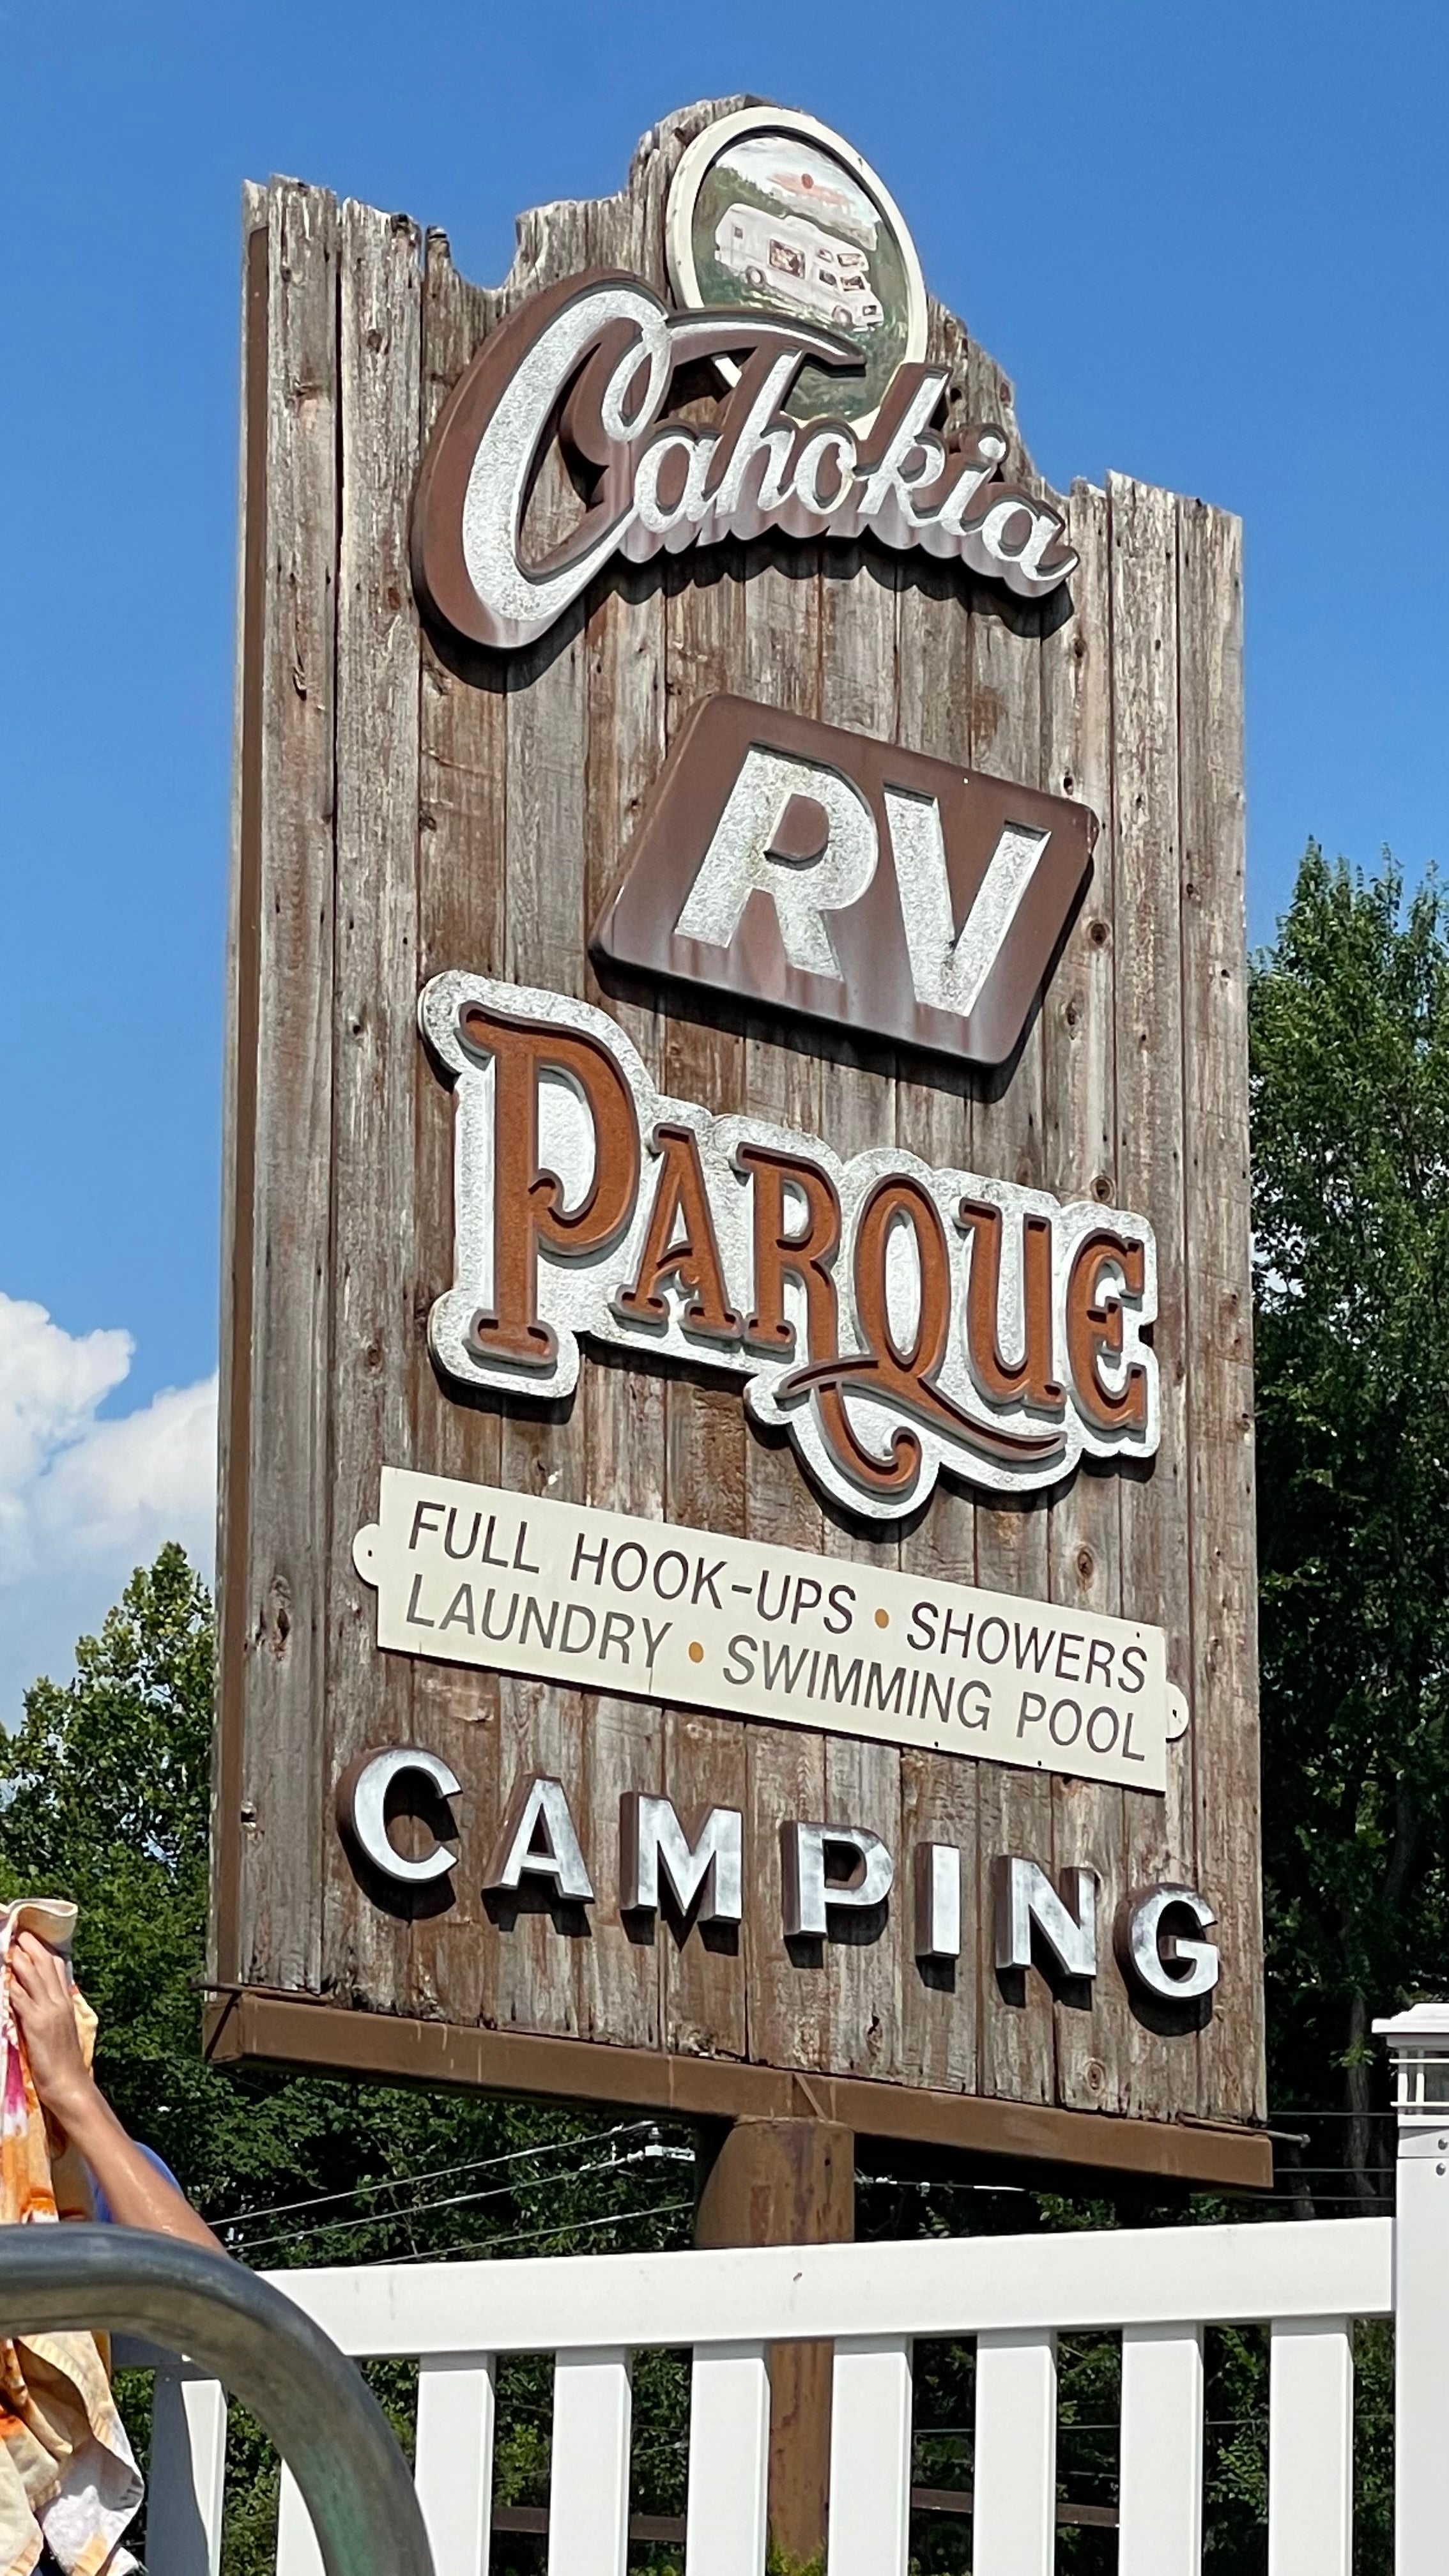 Camper submitted image from Cahokia RV Parque - 5